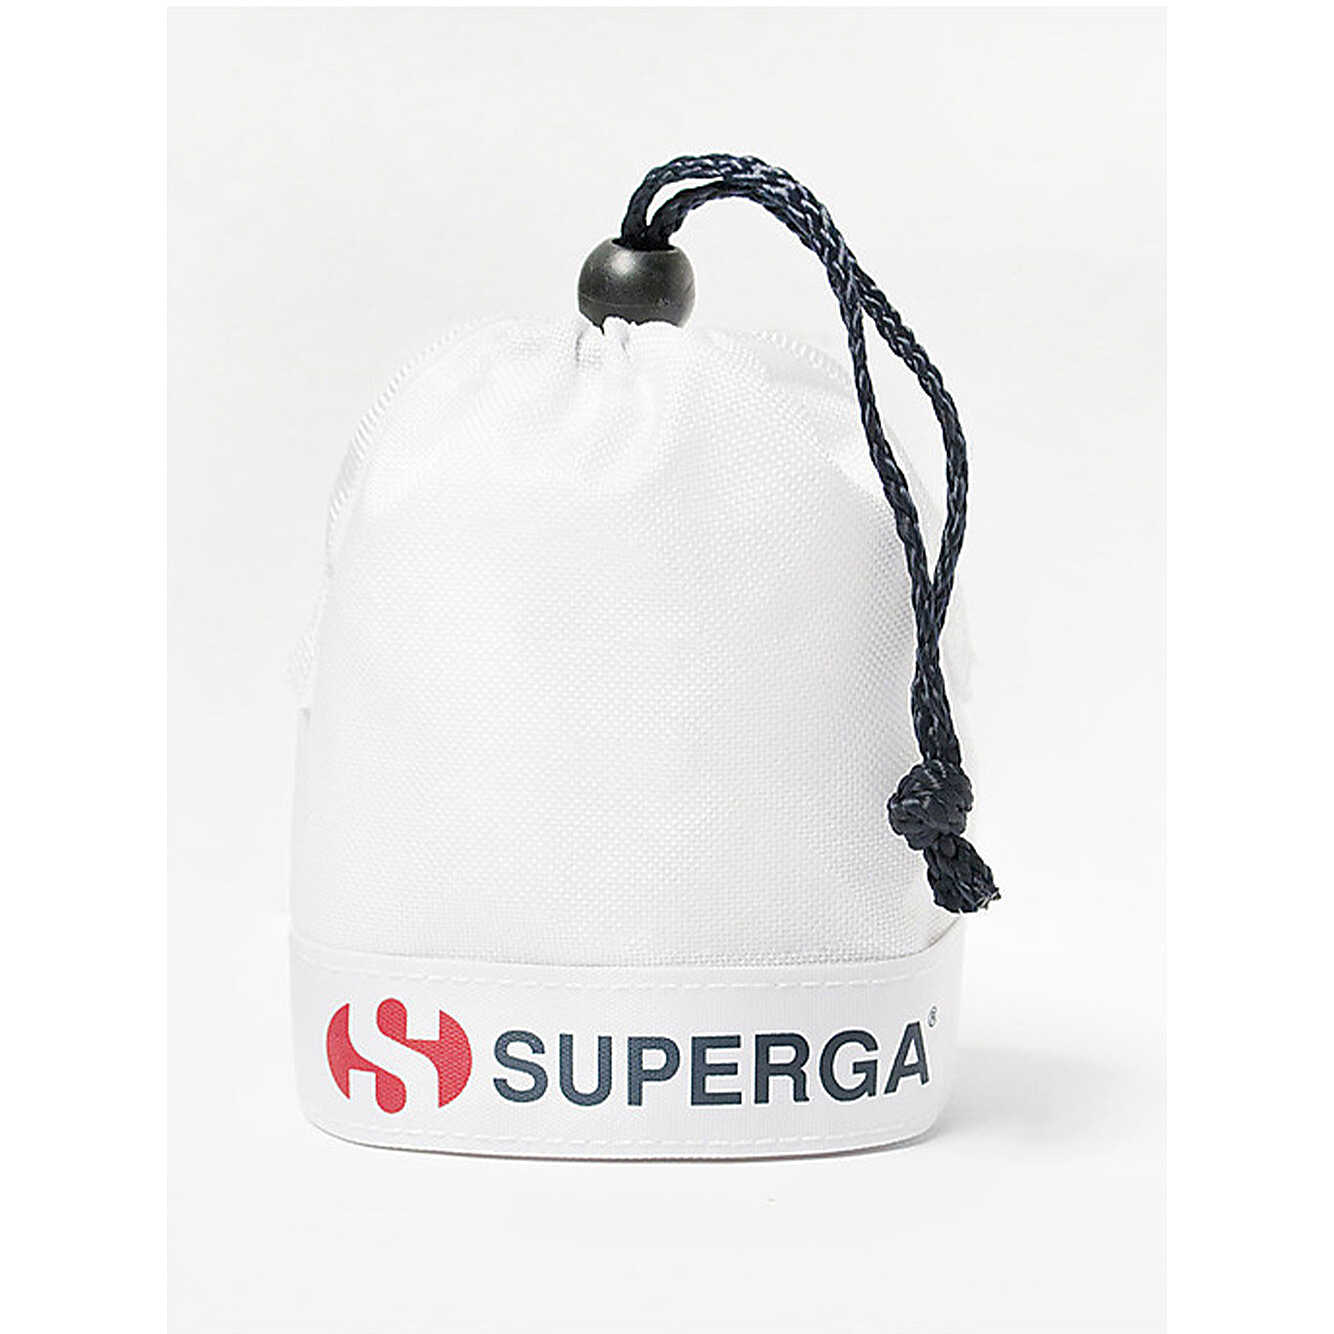 Package only time Superga STC101